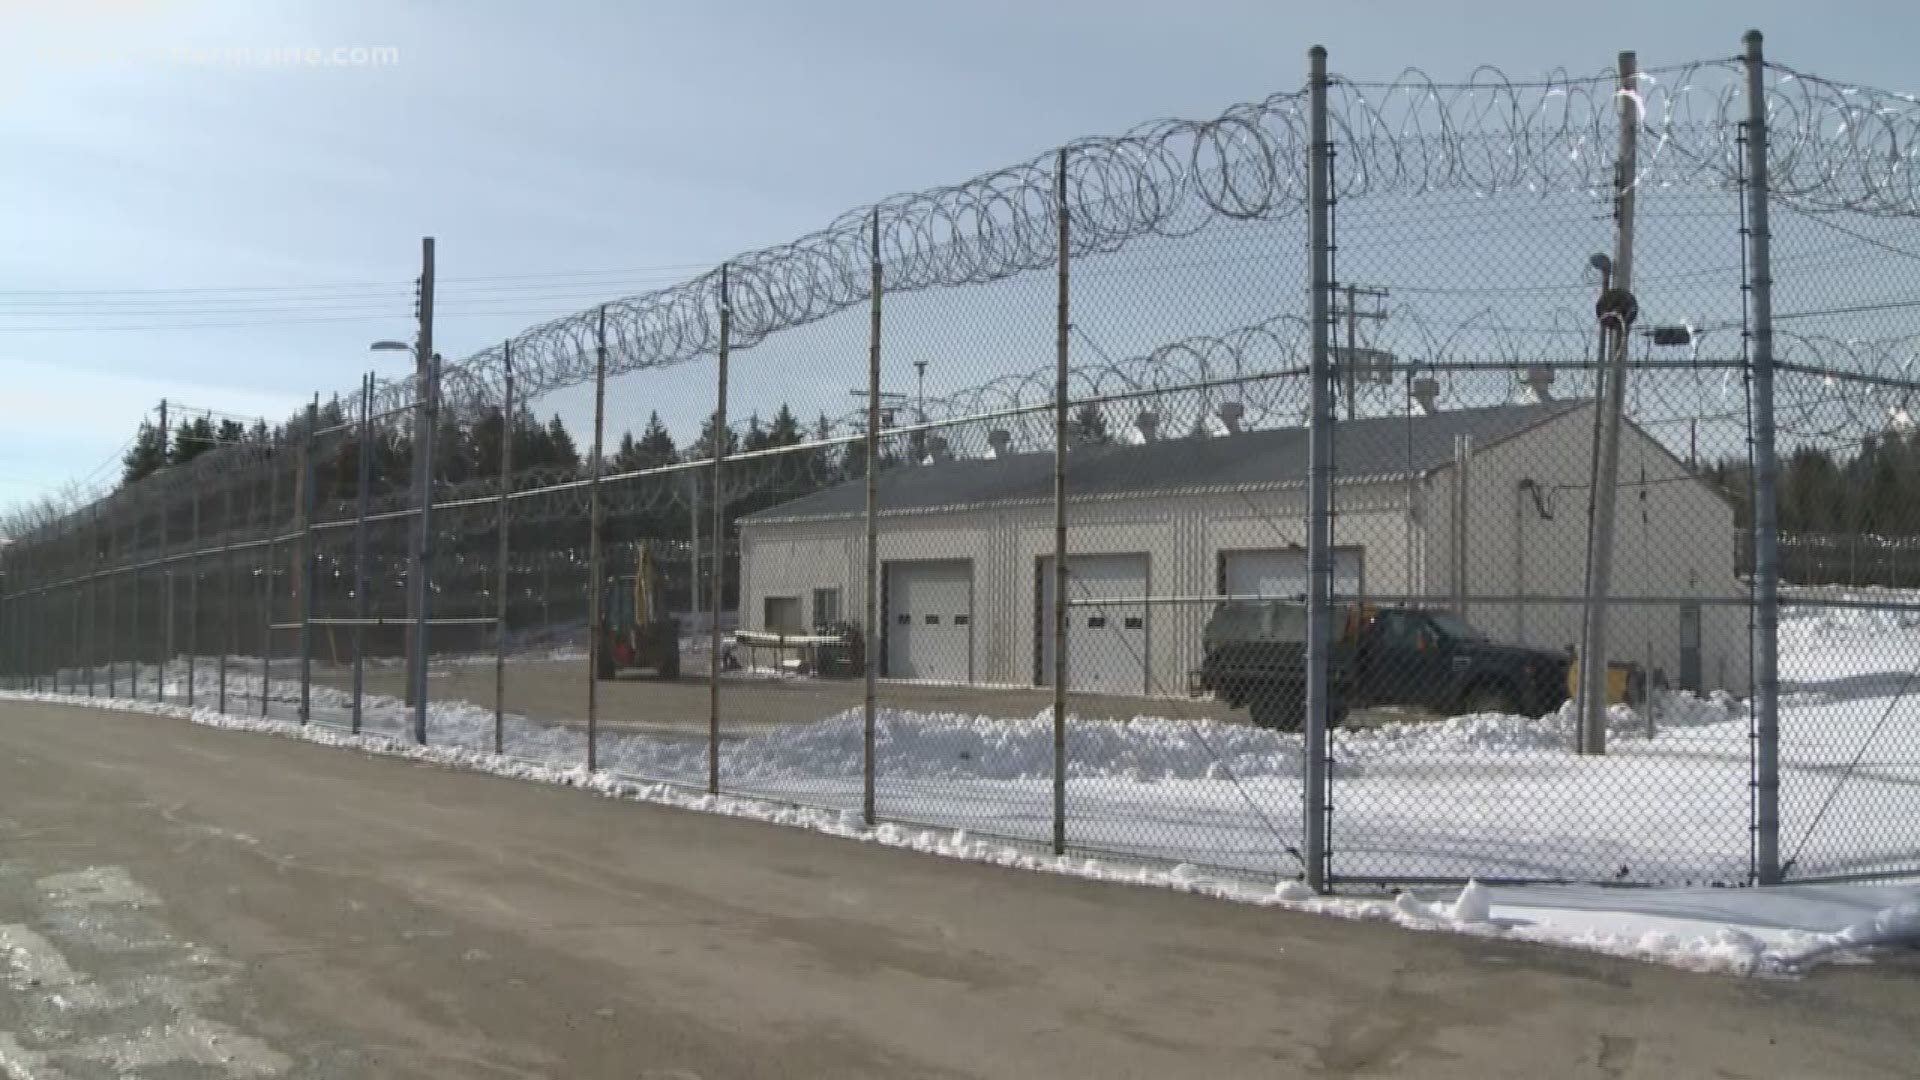 Governor Mills may reopen a prison in Downeast Maine